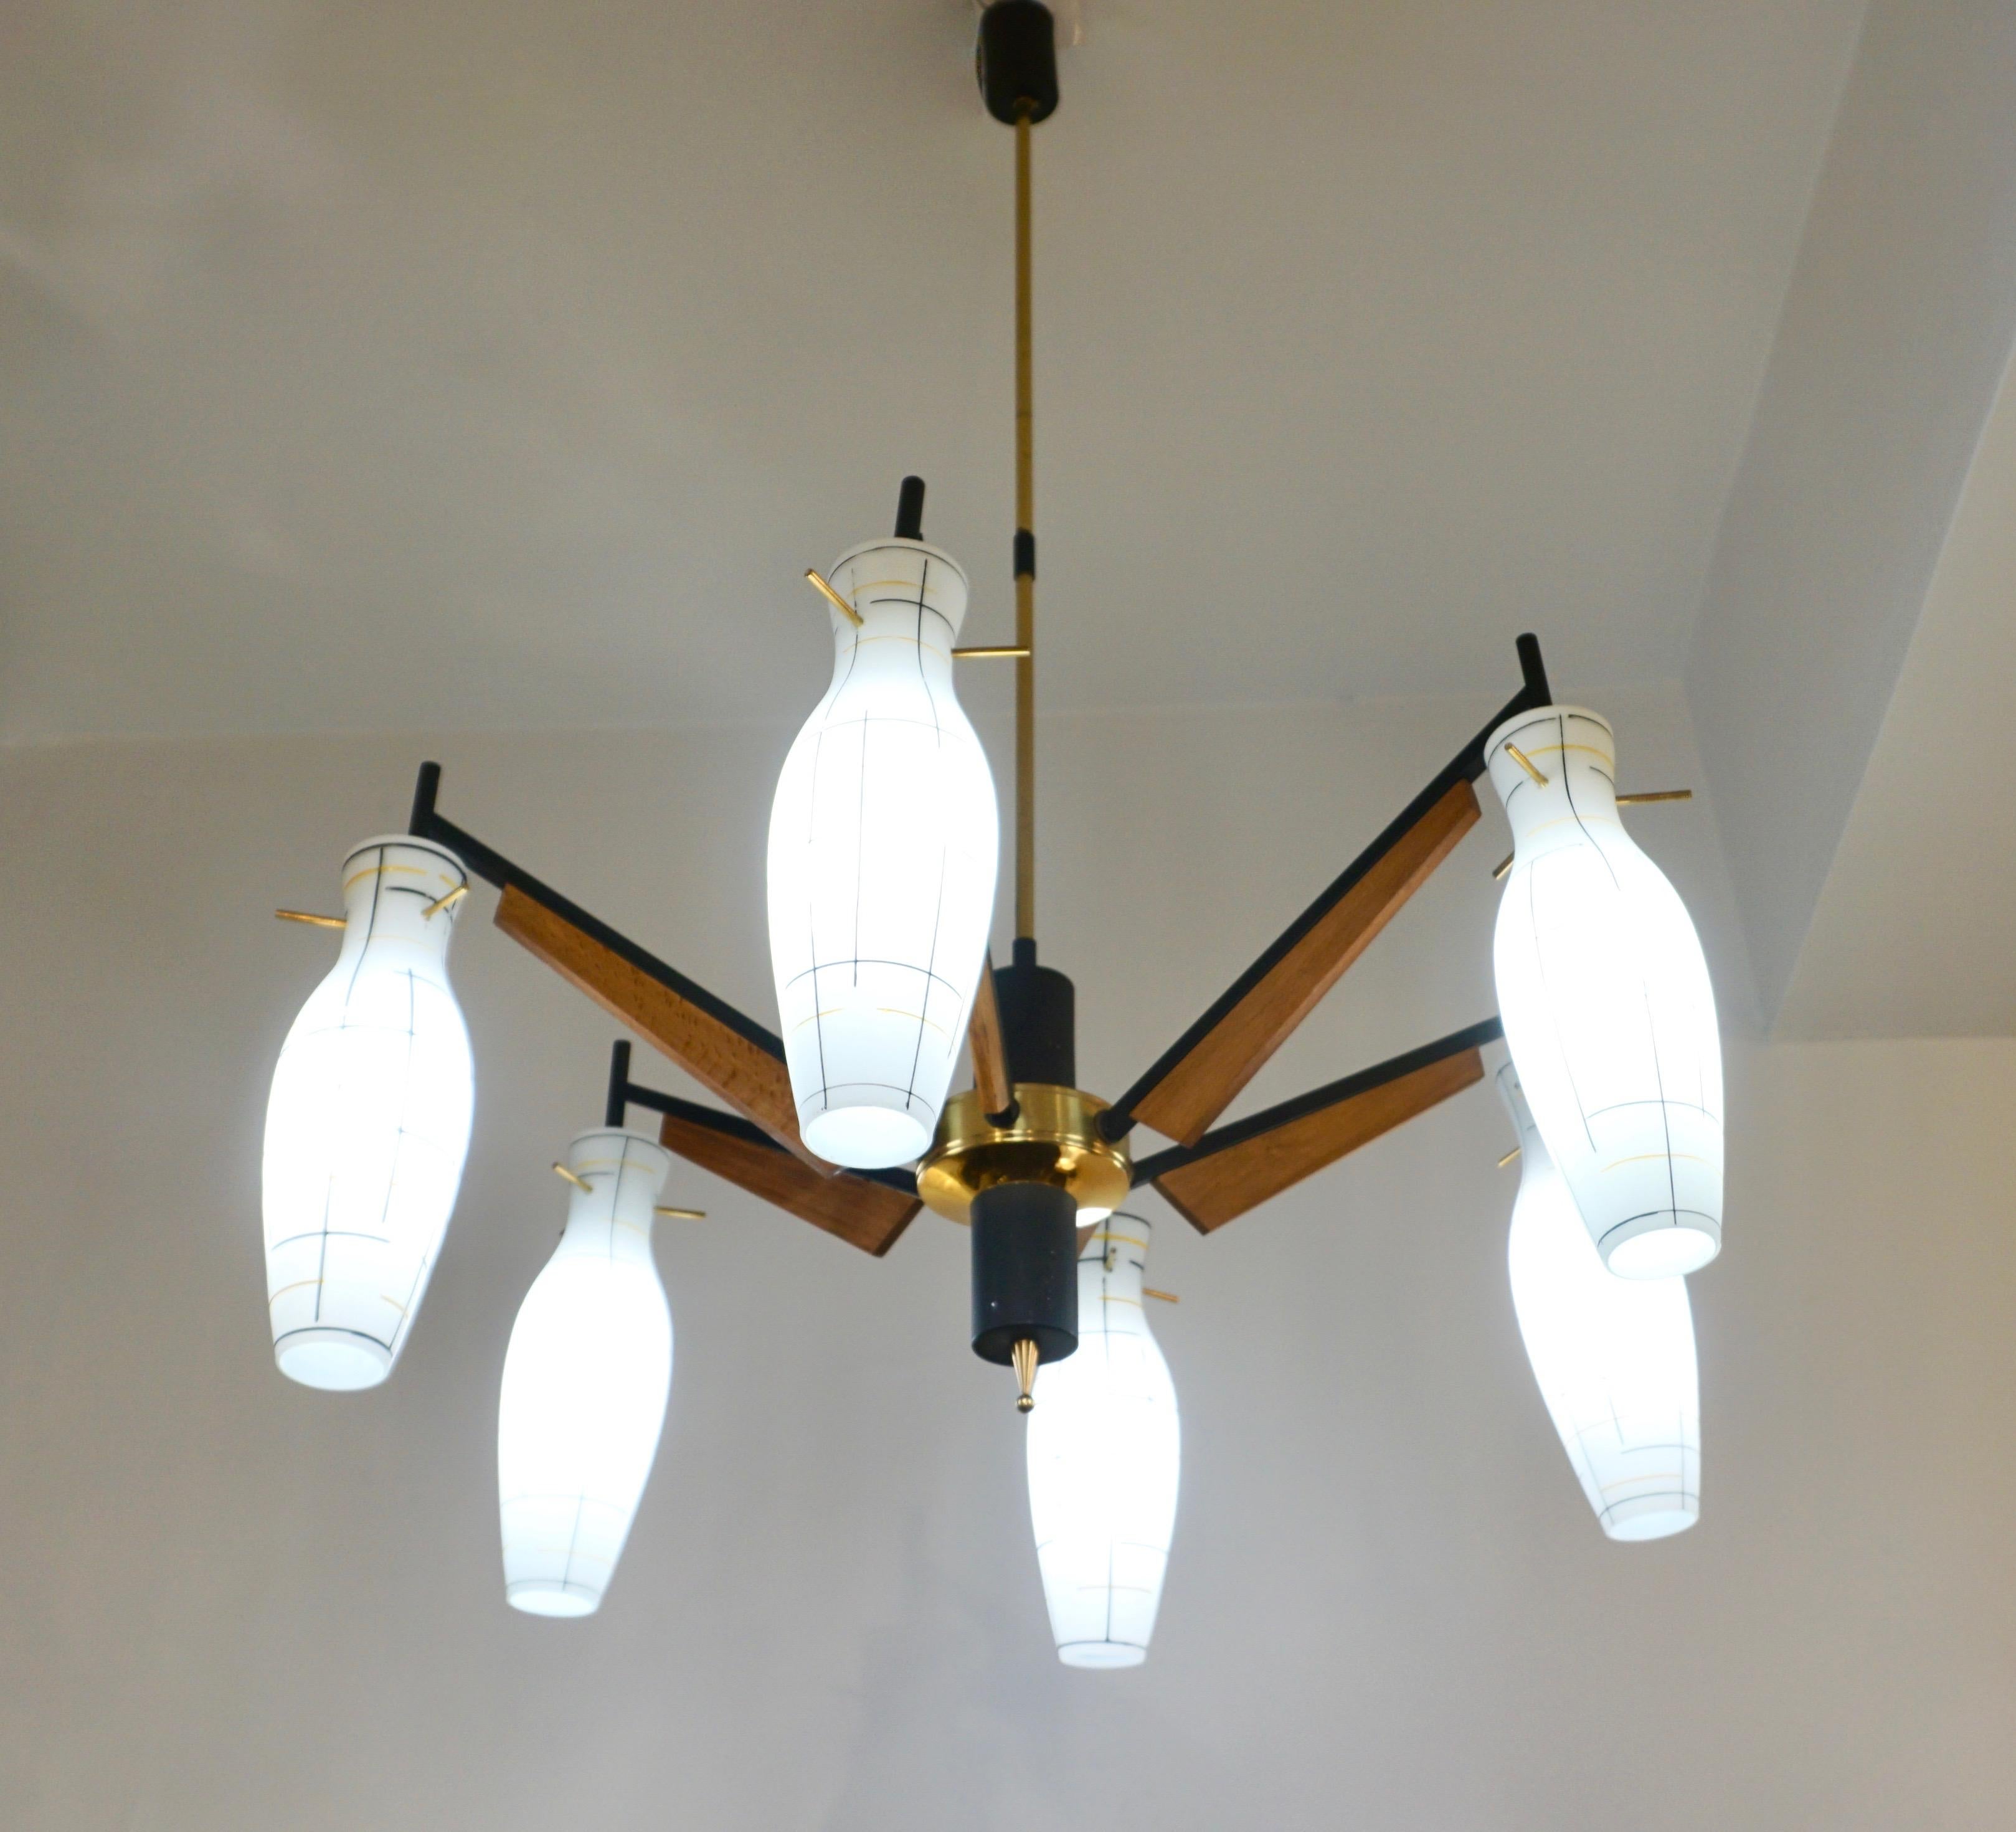 A pair is available in excellent vintage condition – Mid-Century Modern organic design round chandelier with 6 cylinder bottle shaped pendants in a frosted white glass decorated with a Minimalist Mondrian inspired geometric pattern of yellow and